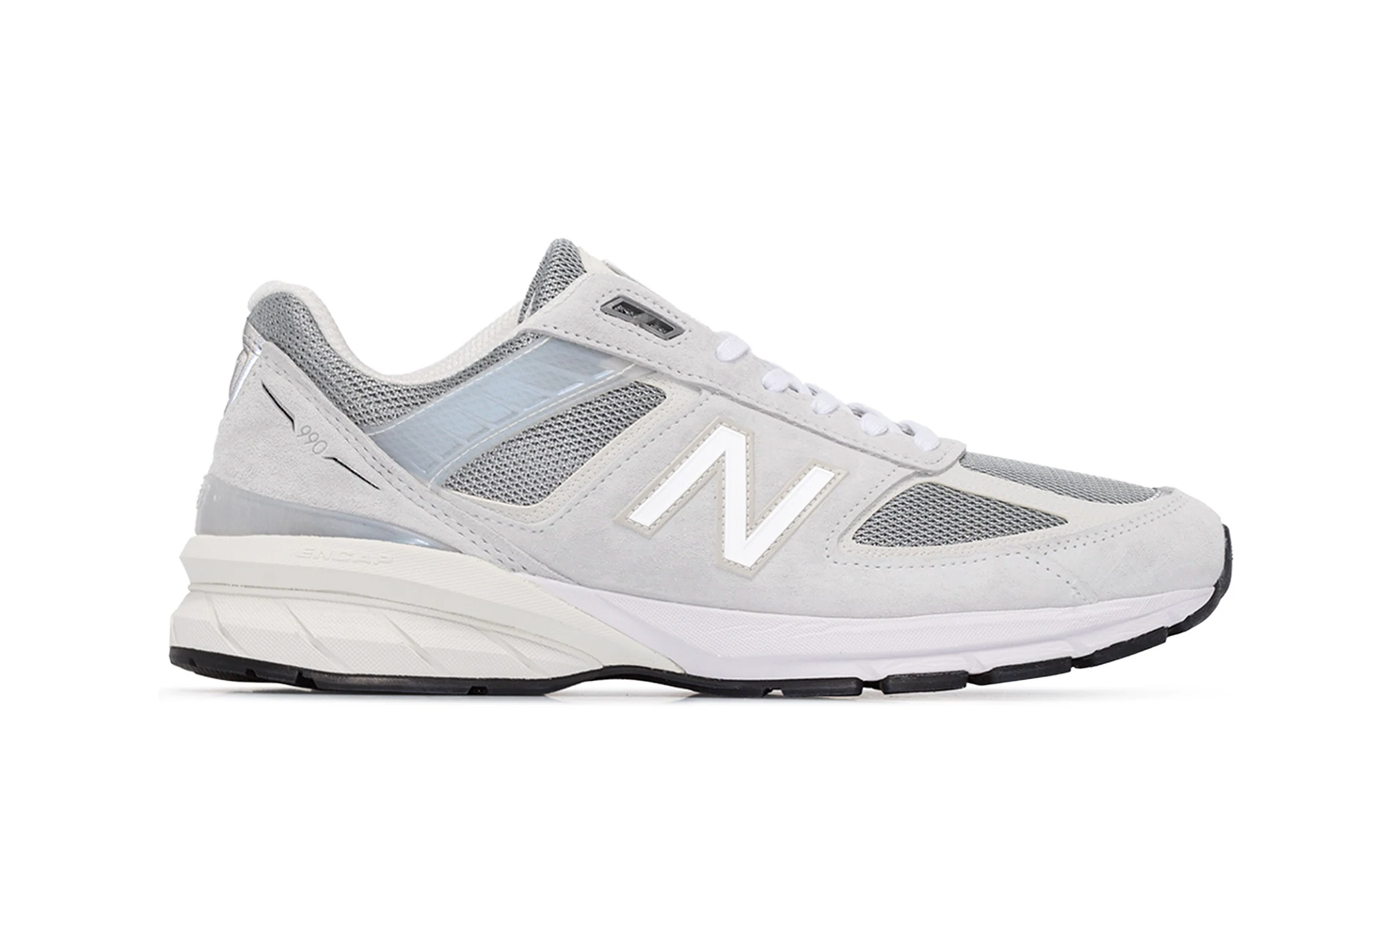 New Balance Grey M990 Reflective Sneakers Release | HYPEBEAST